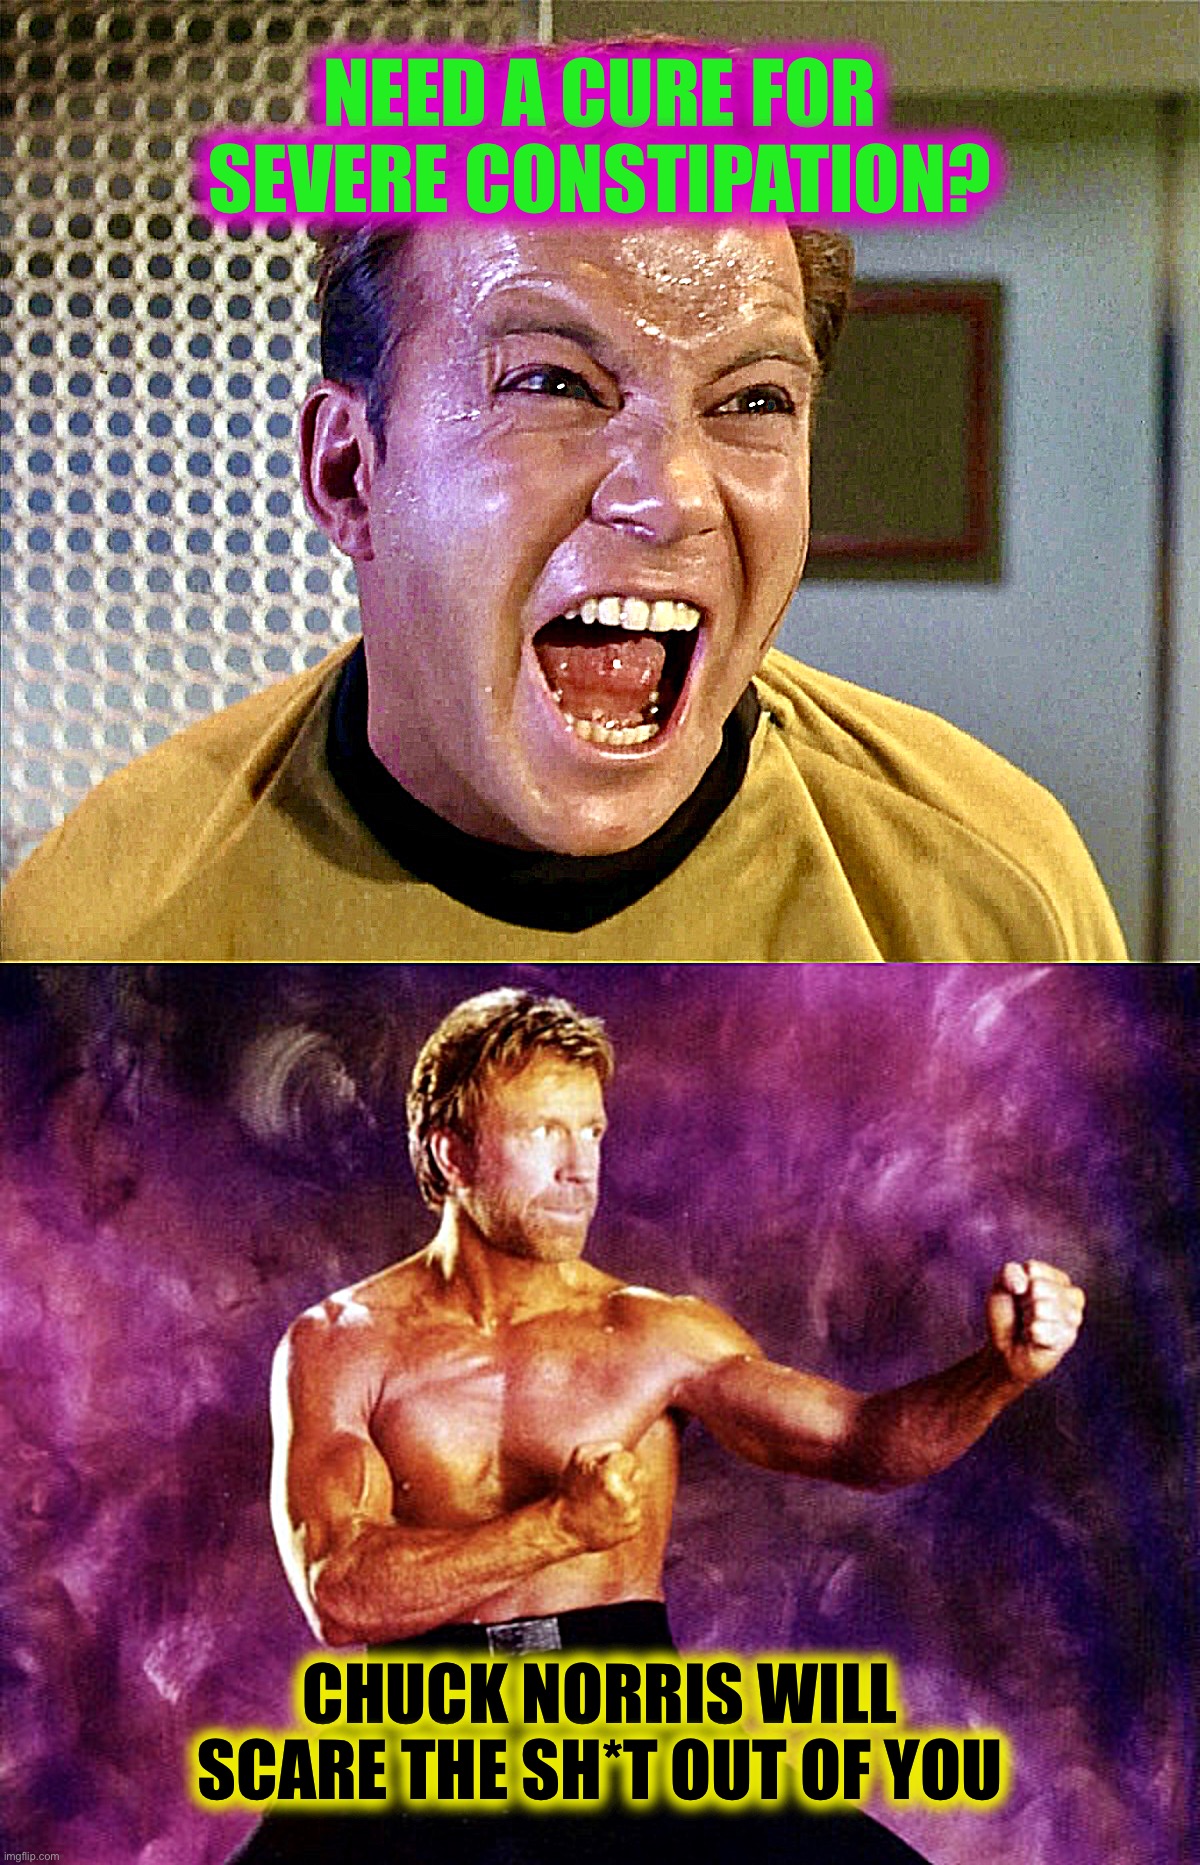 With a little help from your friends | NEED A CURE FOR SEVERE CONSTIPATION? CHUCK NORRIS WILL SCARE THE SH*T OUT OF YOU | image tagged in chuck norris,memes,star trek,funny memes,captain kirk | made w/ Imgflip meme maker